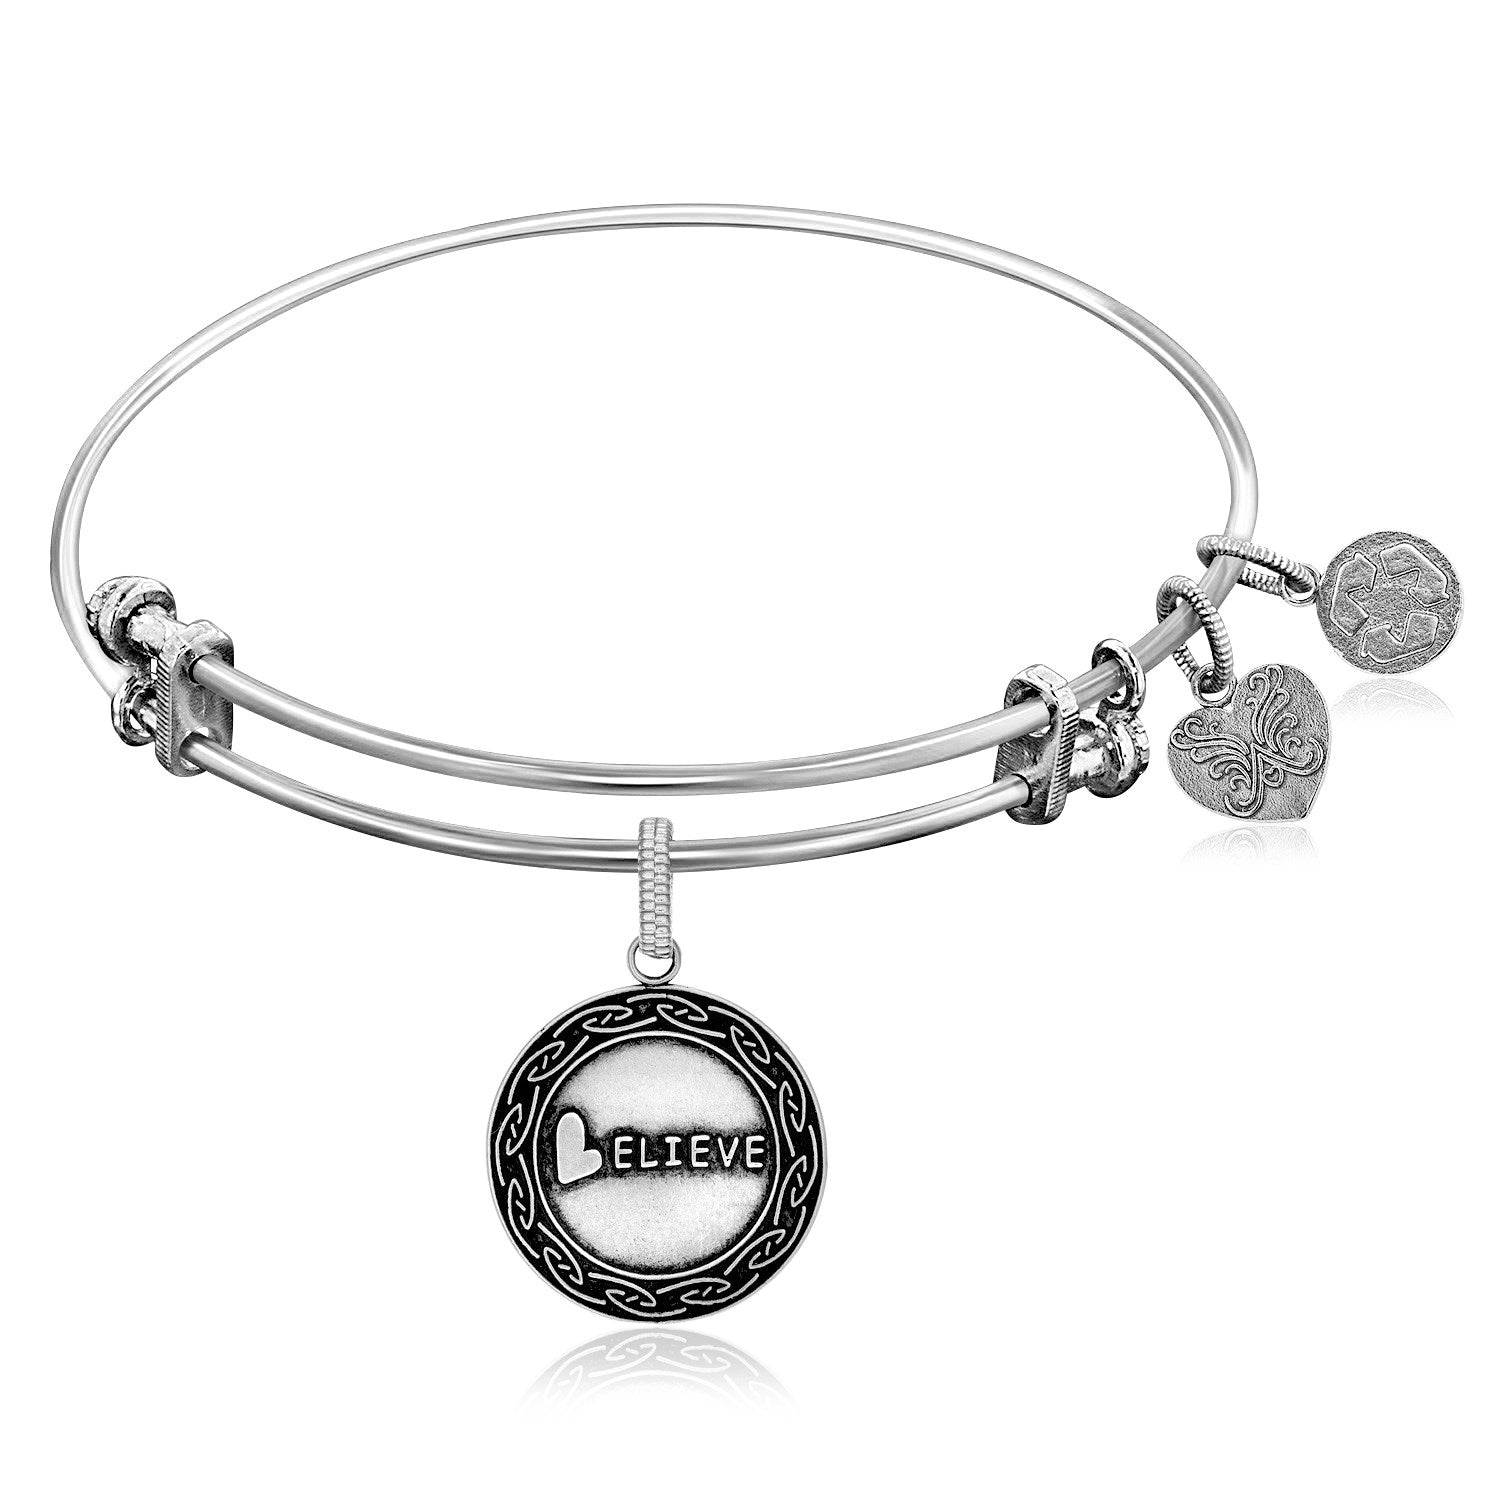 Expandable White Tone Brass Bangle with Believe Symbol